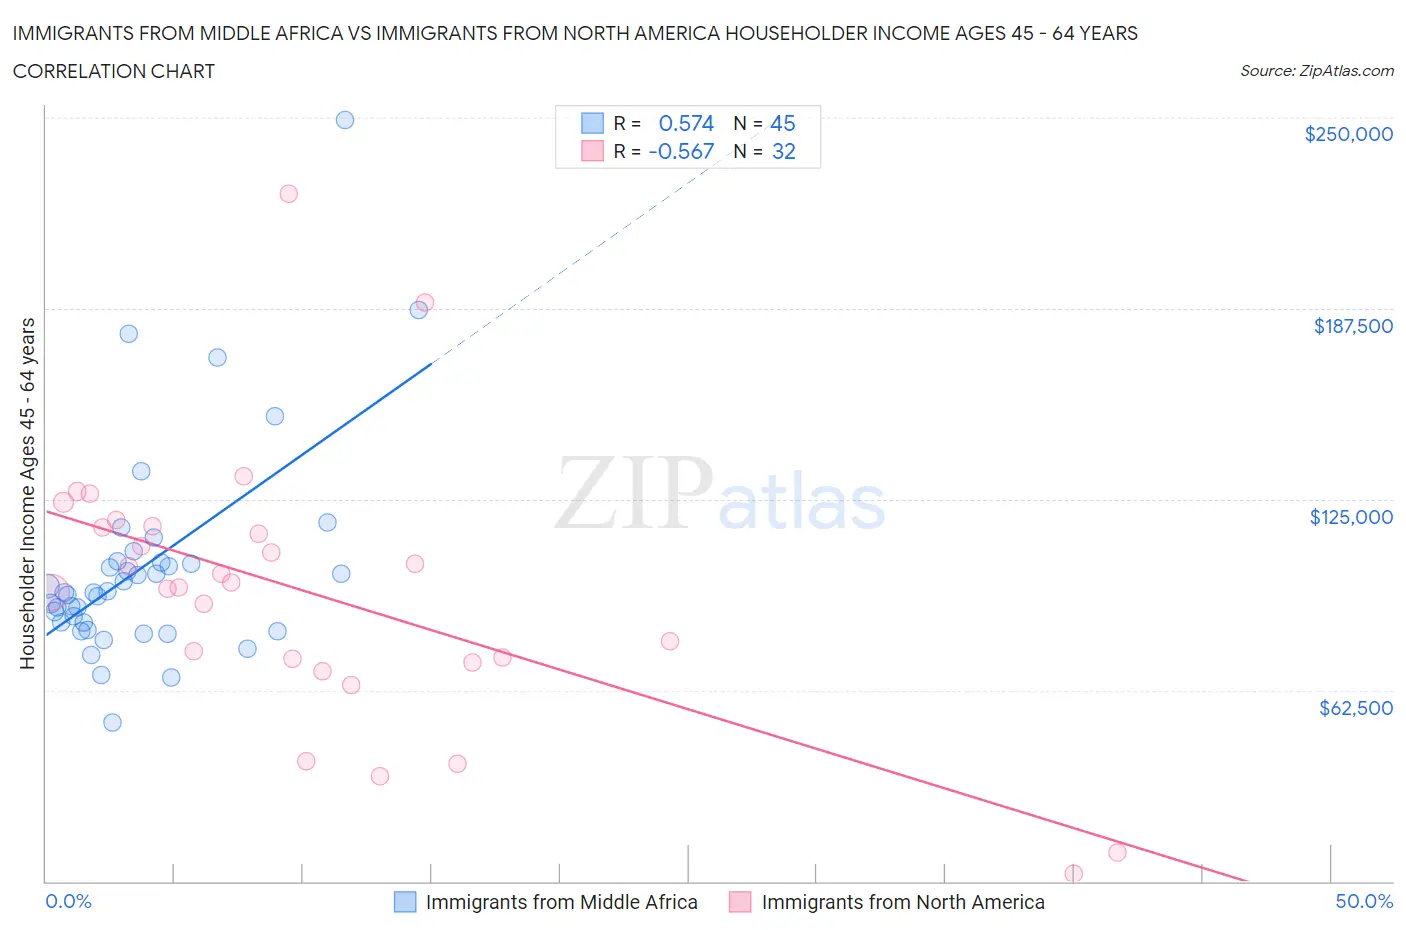 Immigrants from Middle Africa vs Immigrants from North America Householder Income Ages 45 - 64 years